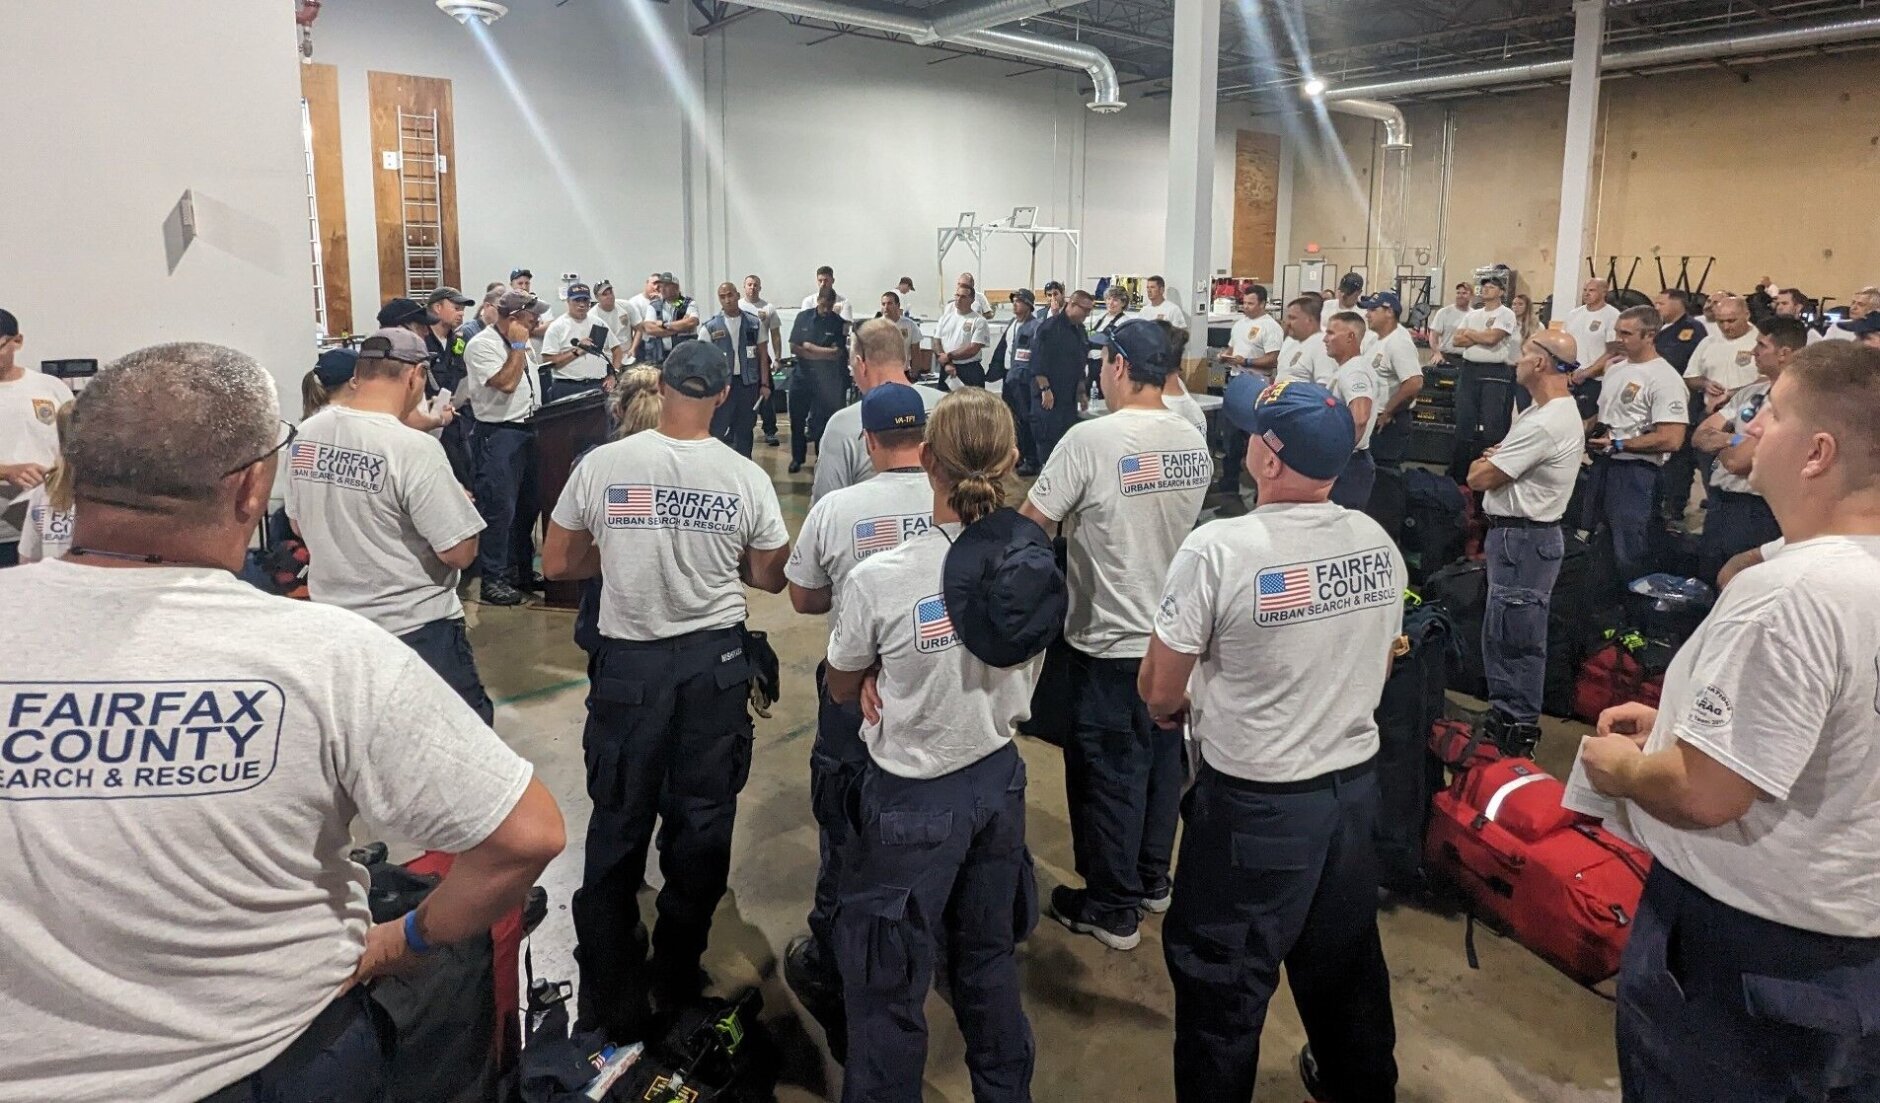 Members of Fairfax County's Urban Search and Rescue Team at a gathering.